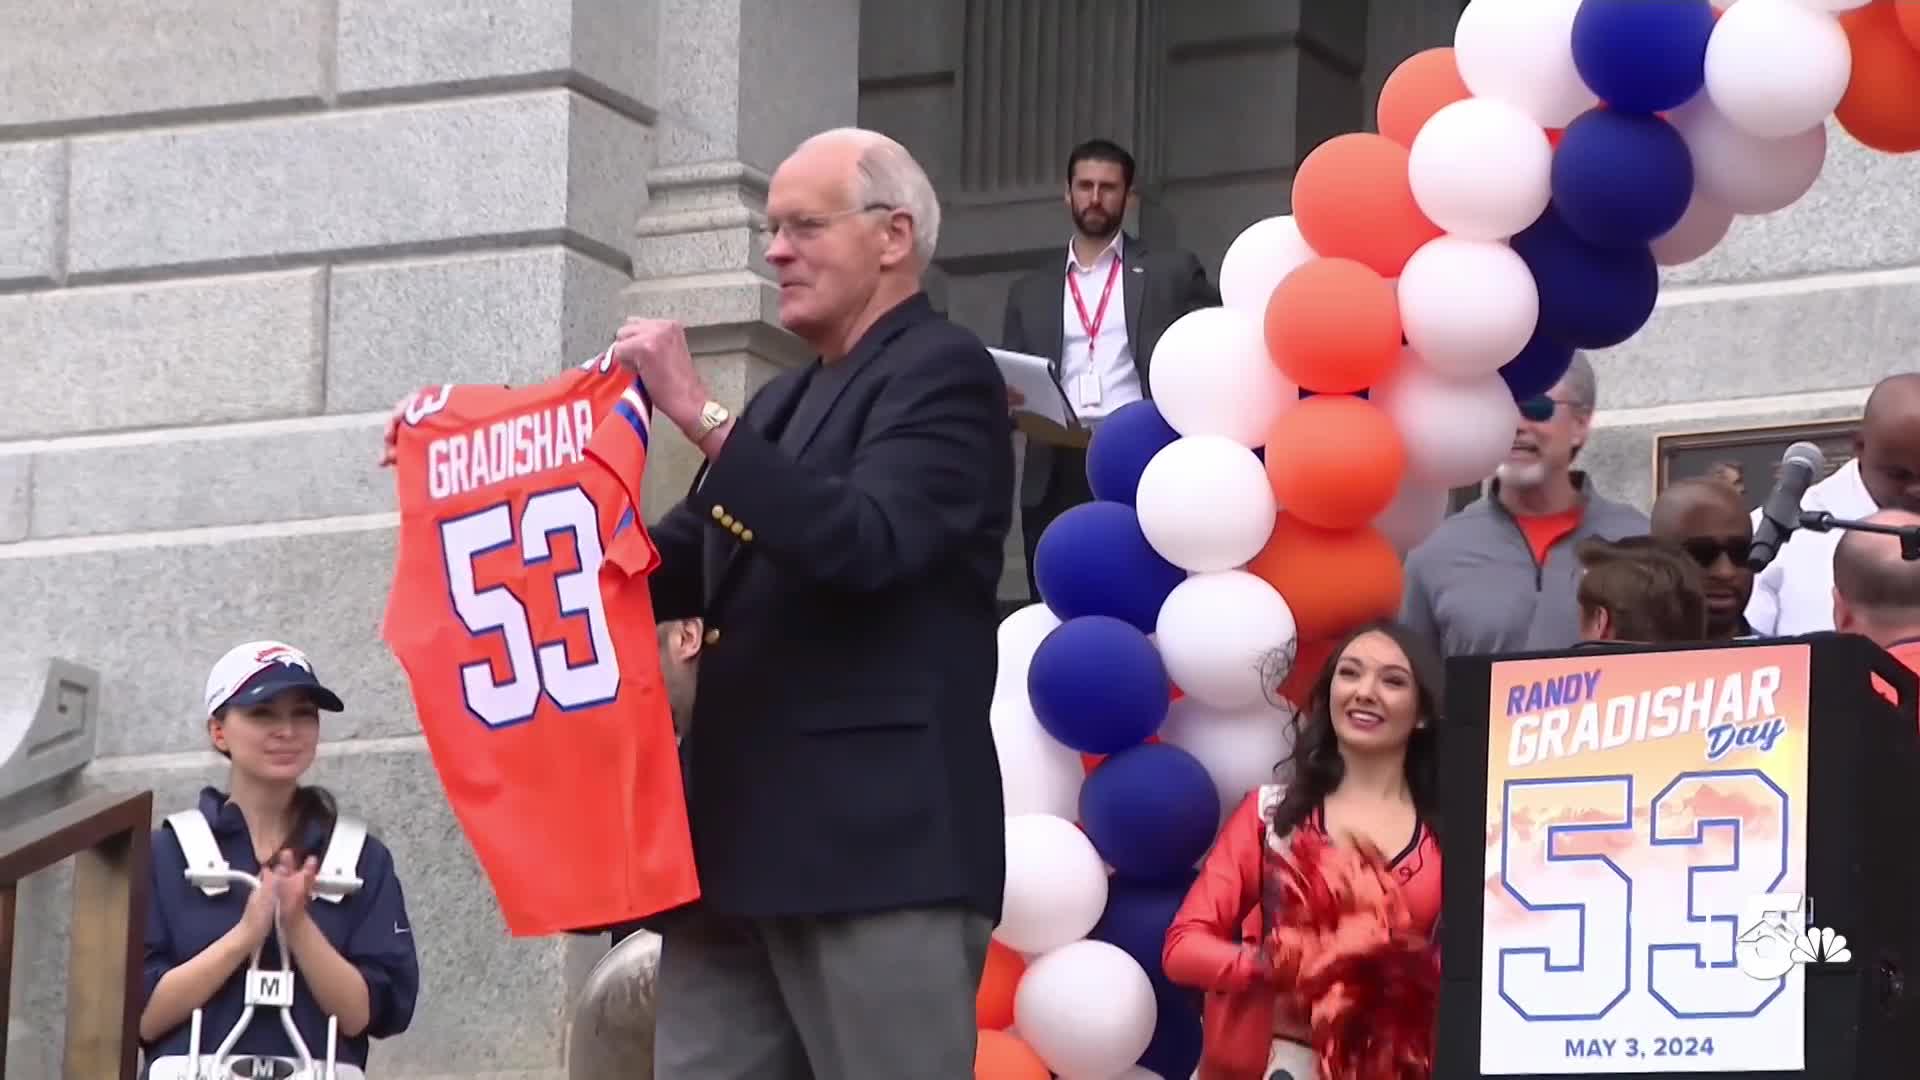 Former Bronco honored as May 3 is declared Randy Gradishar Day in Colorado